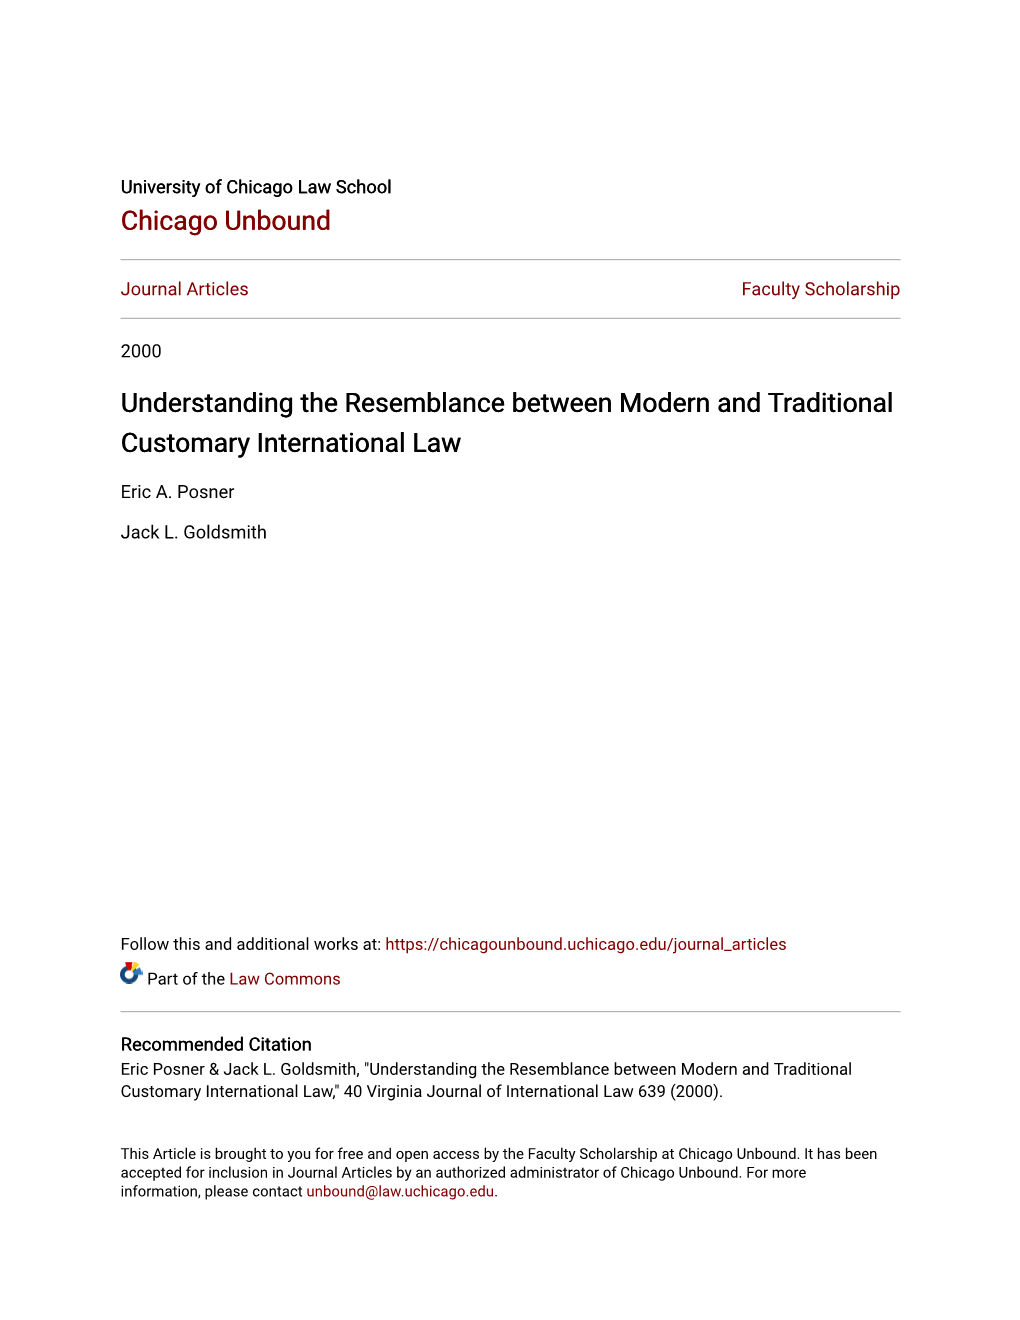 Understanding the Resemblance Between Modern and Traditional Customary International Law